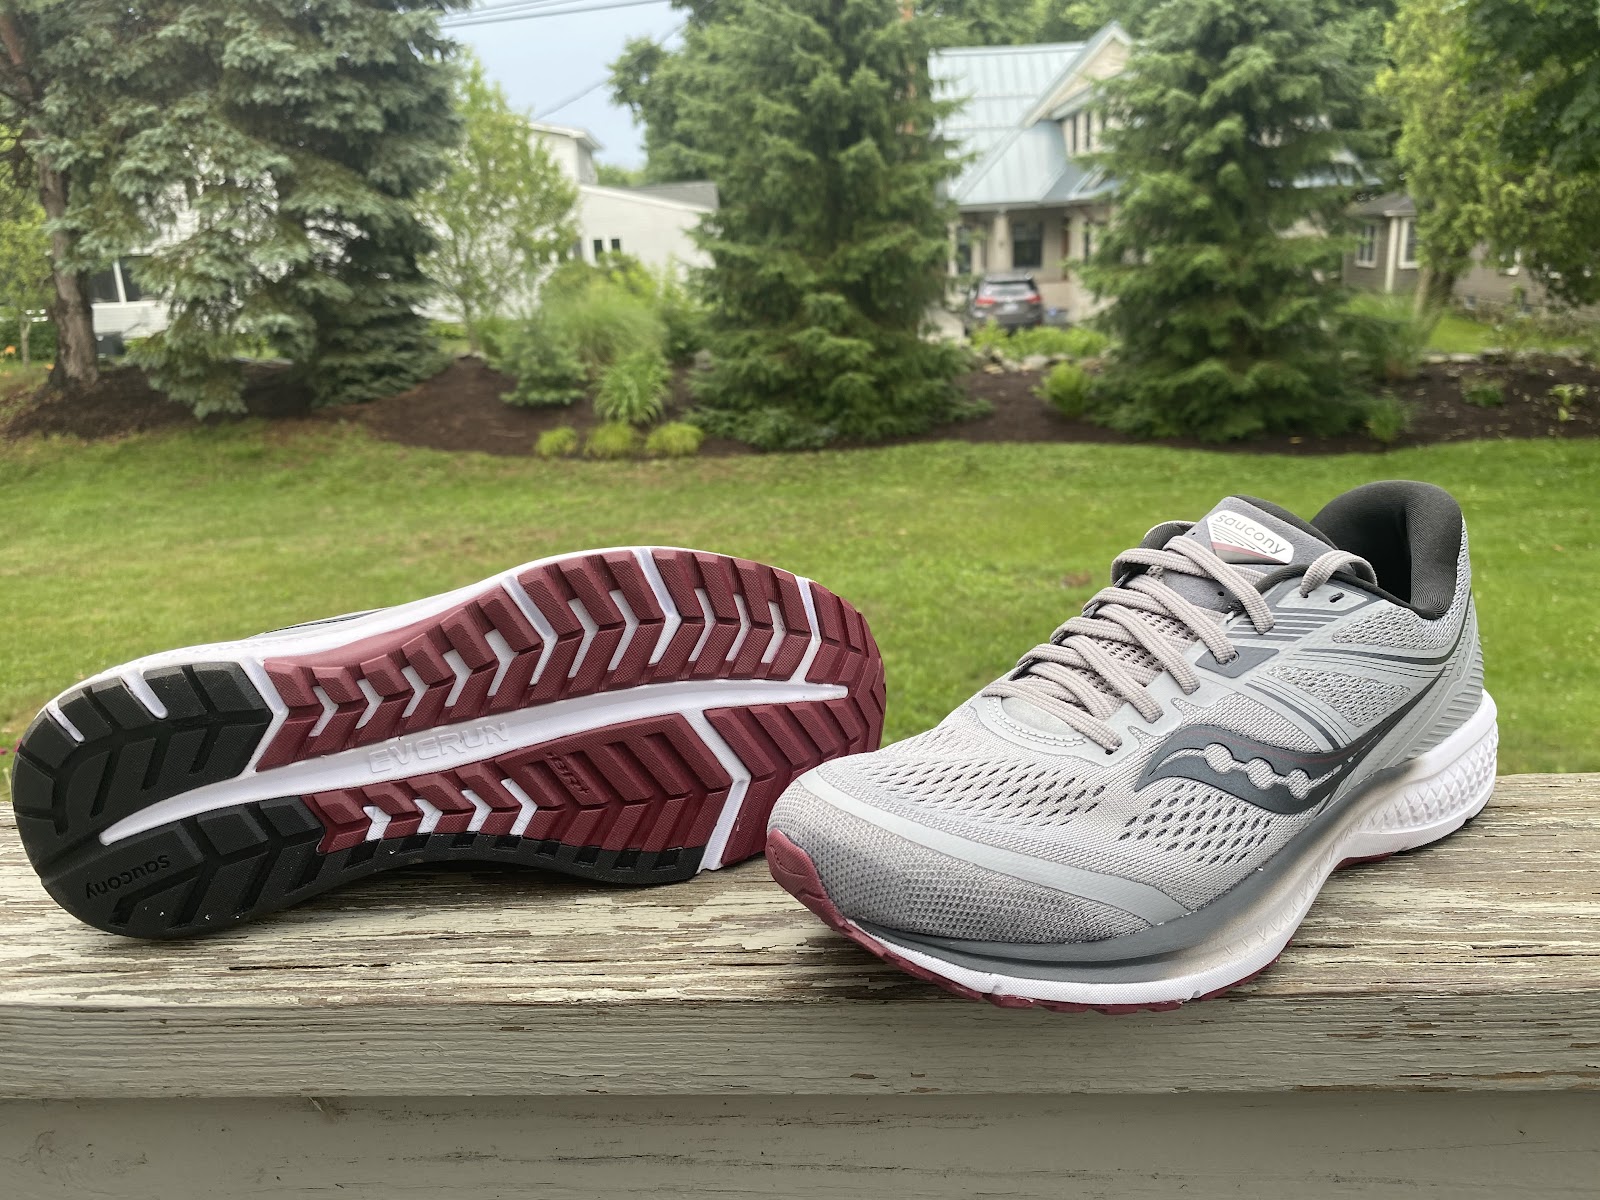 Road Trail Run: Saucony Omni 19 Review: Stable Comfort Cruiser